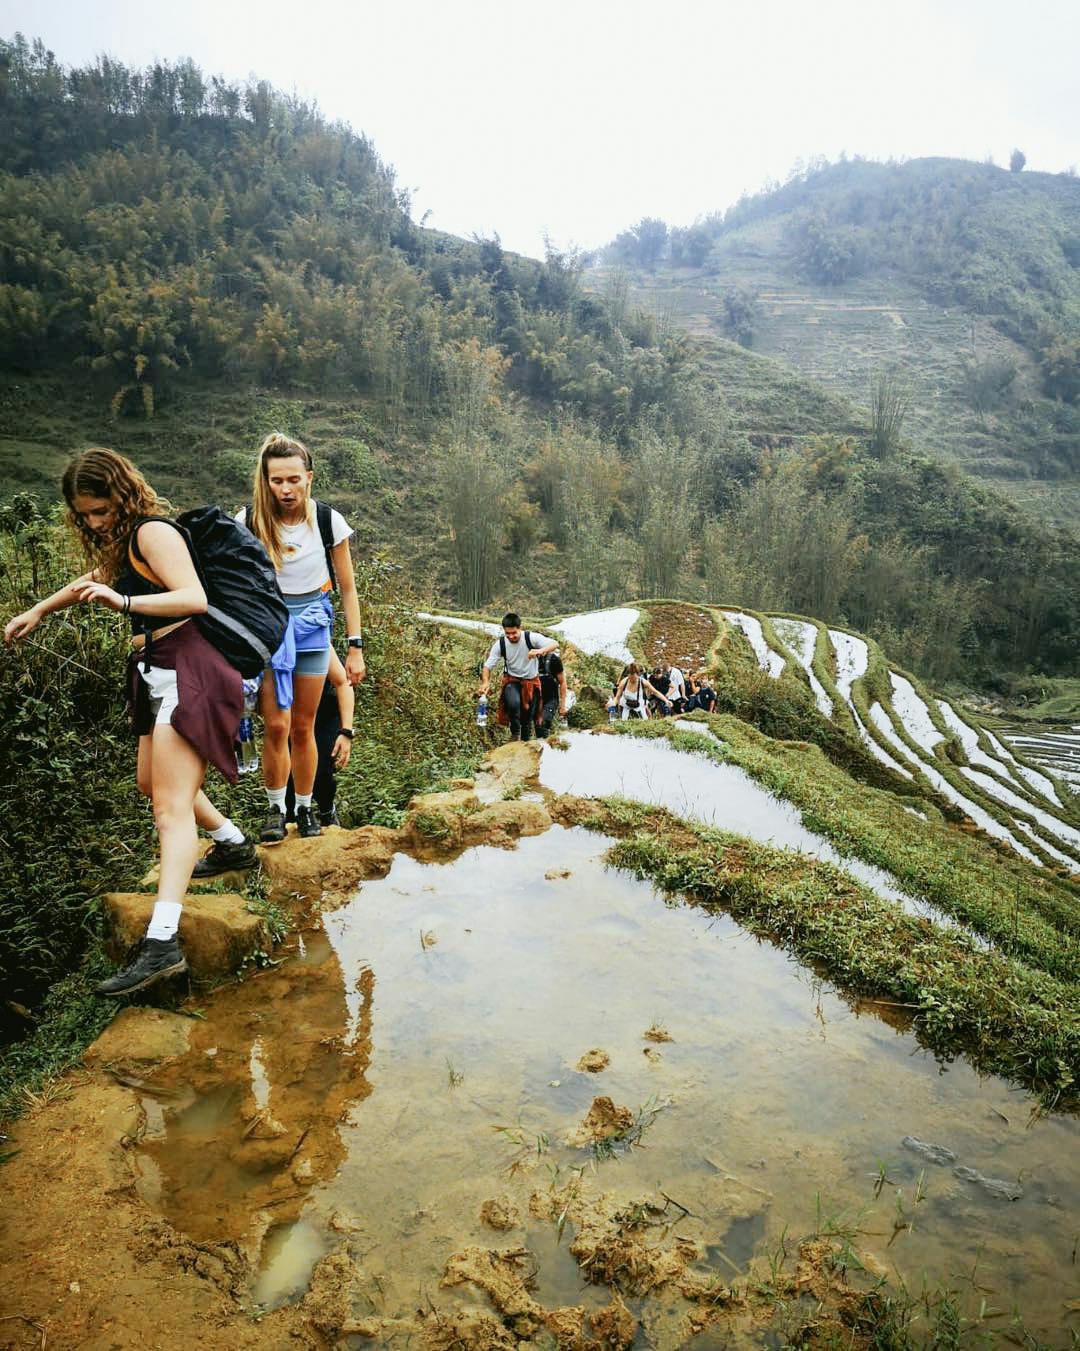 The most popular thing to do in Sapa is to explore the rice paddy fields by trekking. 